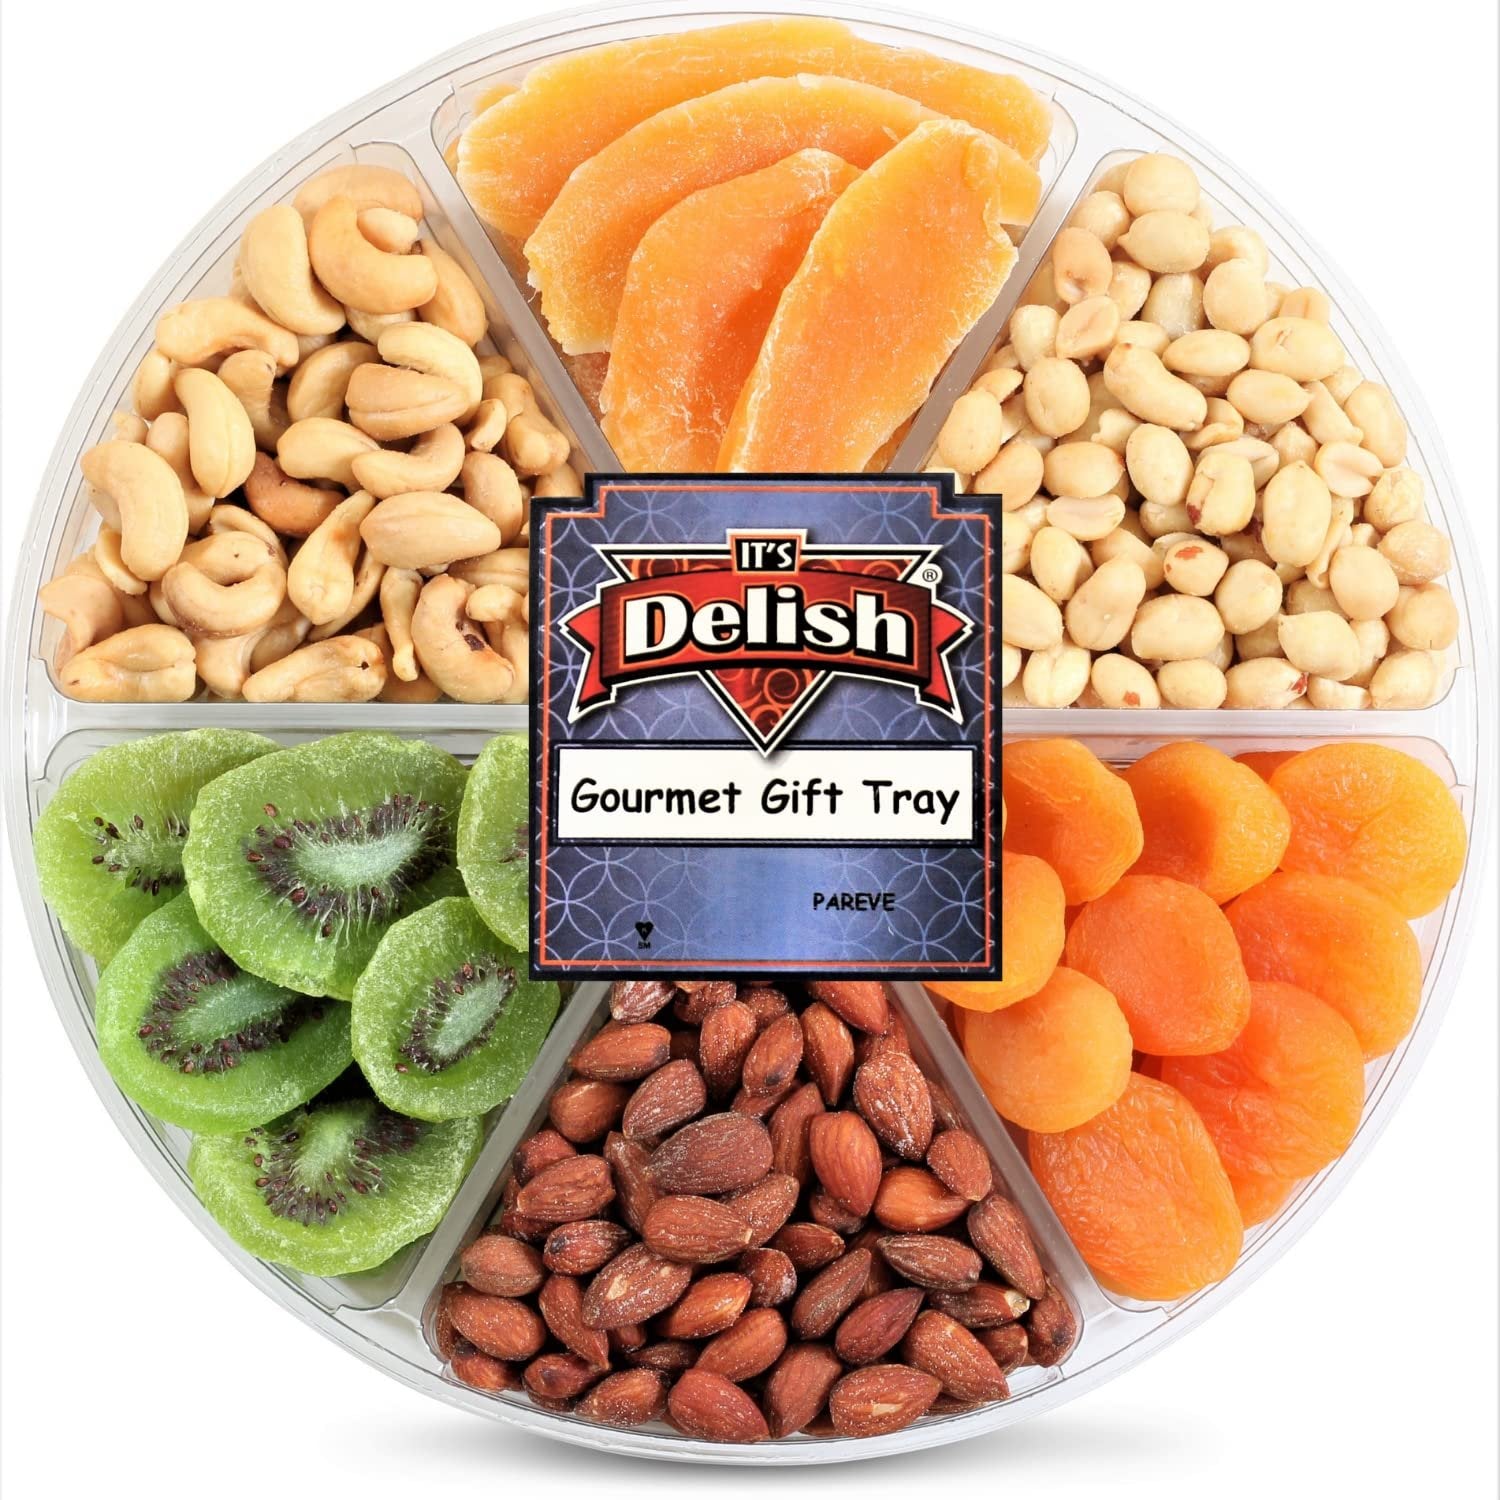 Dried Fruit and Nuts Gift Basket - Gourmet Holiday Gift Box - 10 Variety  Holiday Healthy Snack - 1.43 lbs Elegant Orange Box - Cerez Pazari -